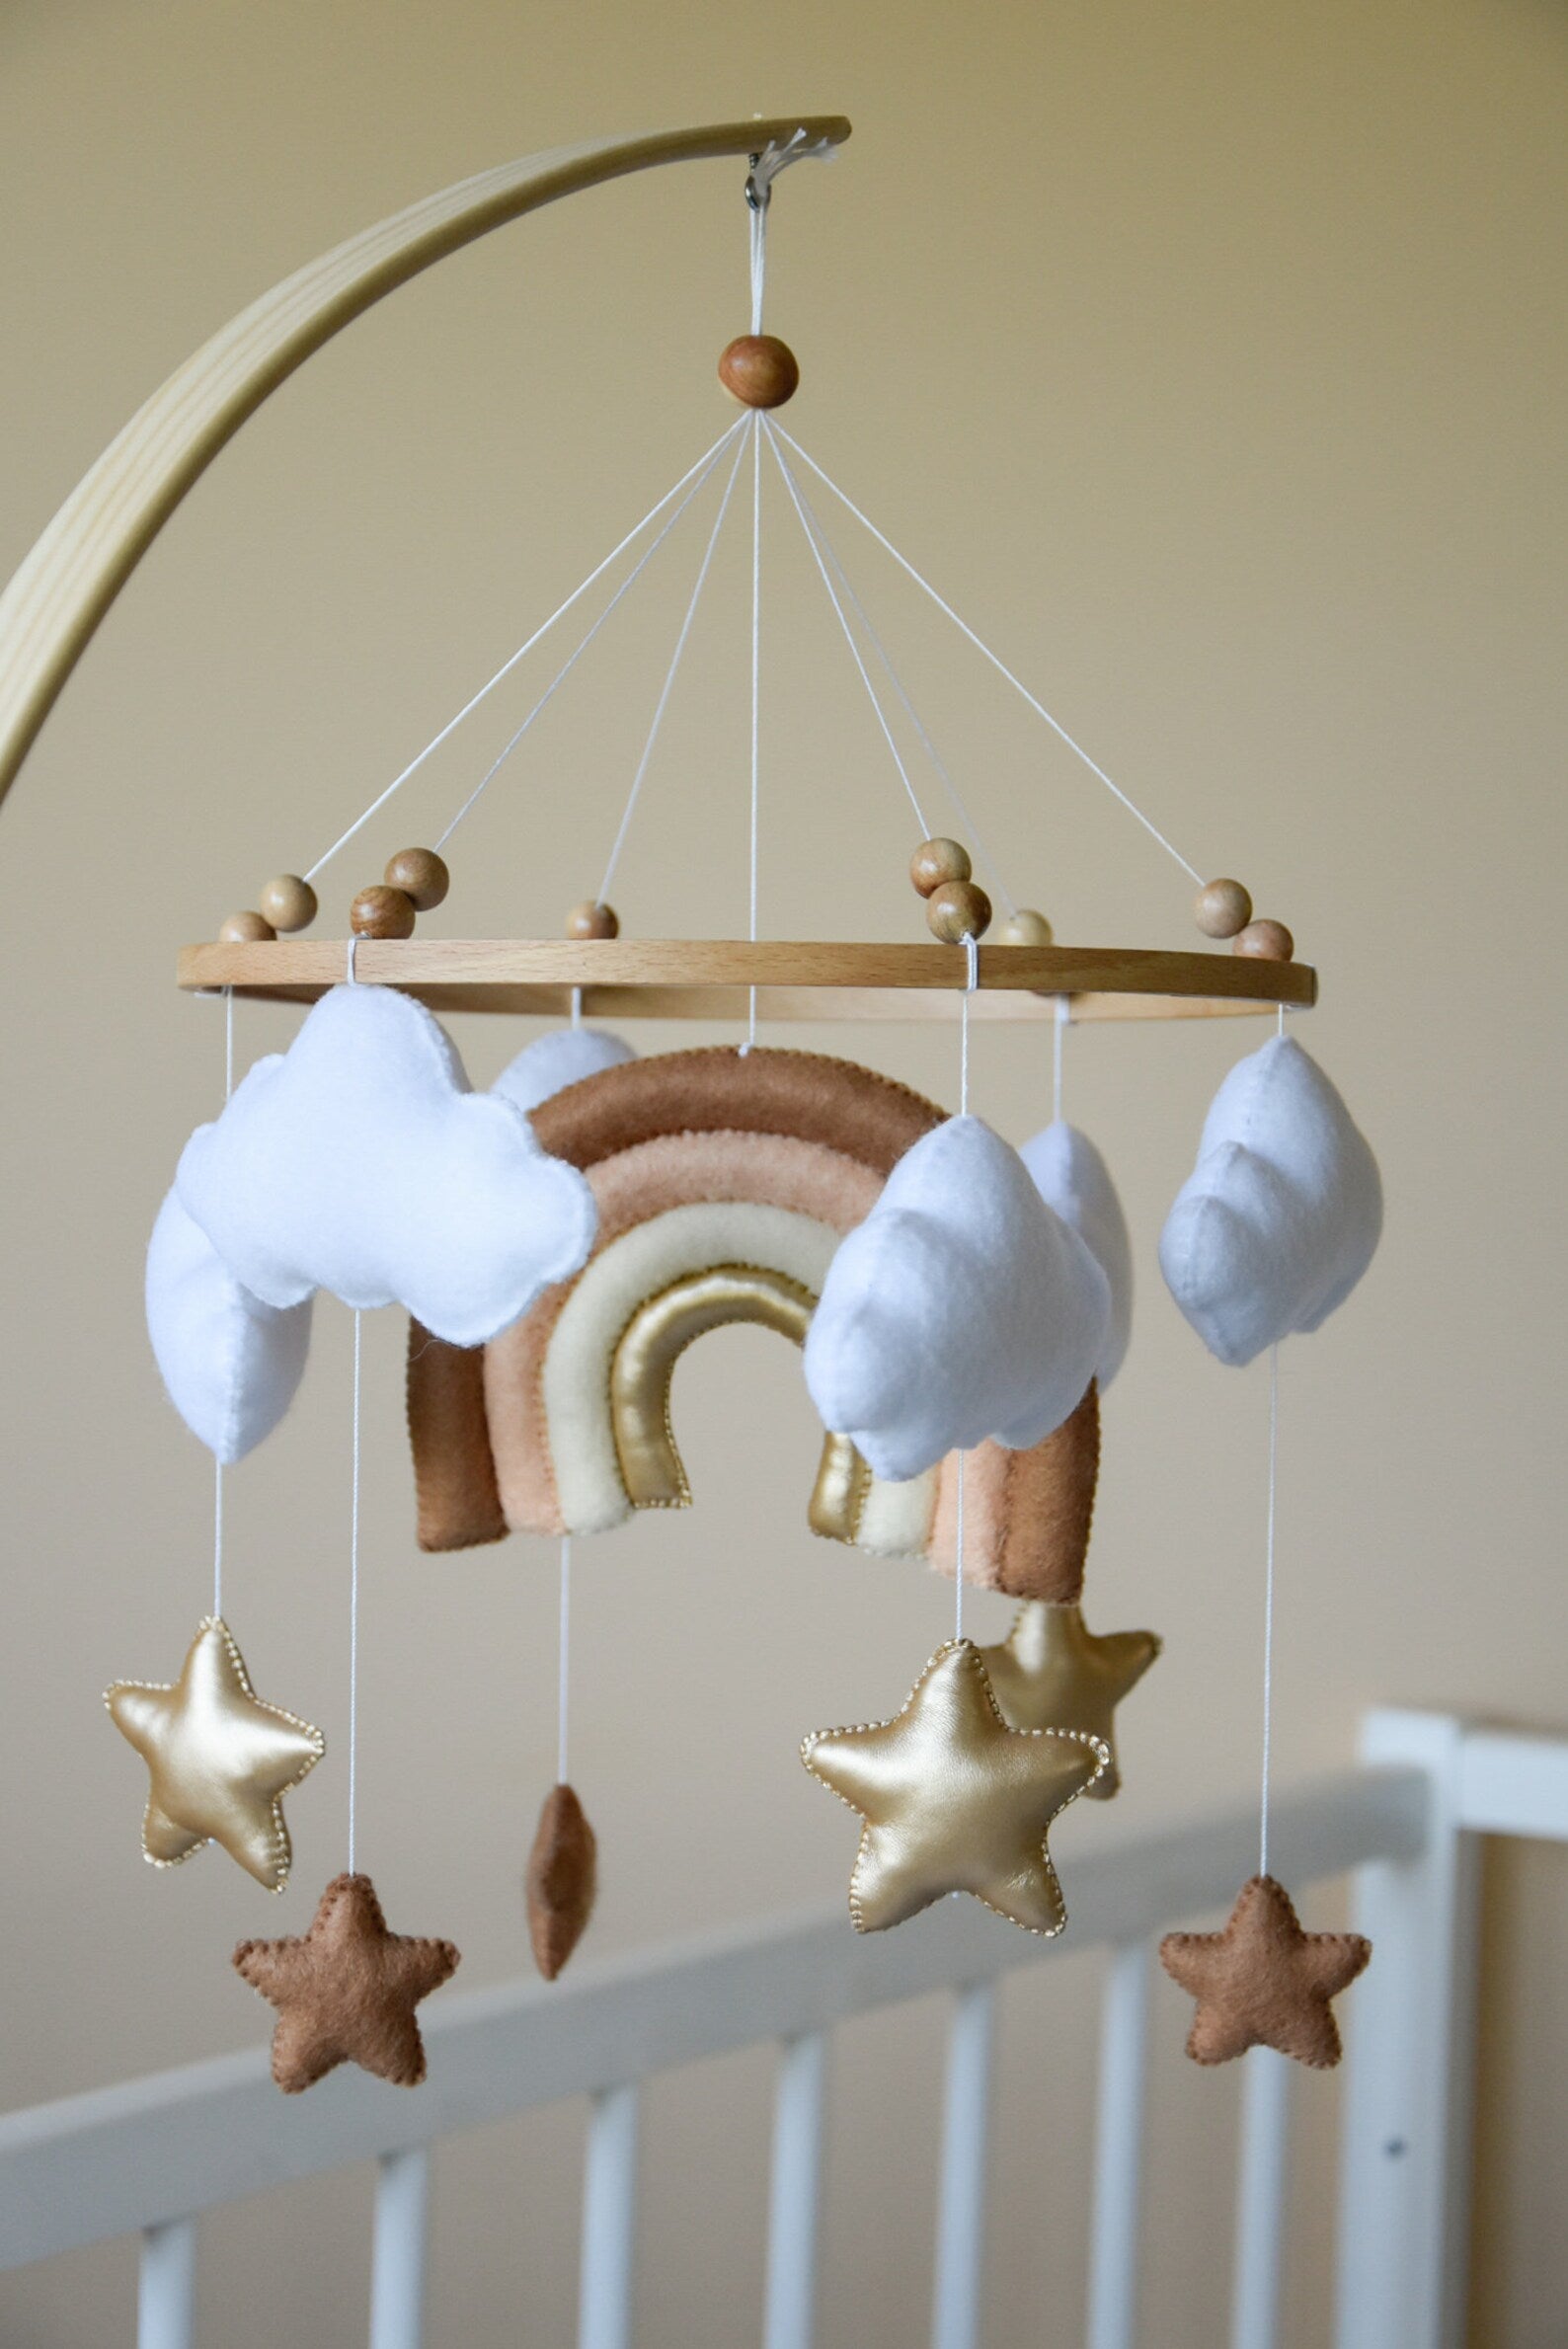 Rainbow baby mobile with colden and brown stars, stars and clouds mobile, nursery baby mobile, baby shower gift, boho nursery decor, boho